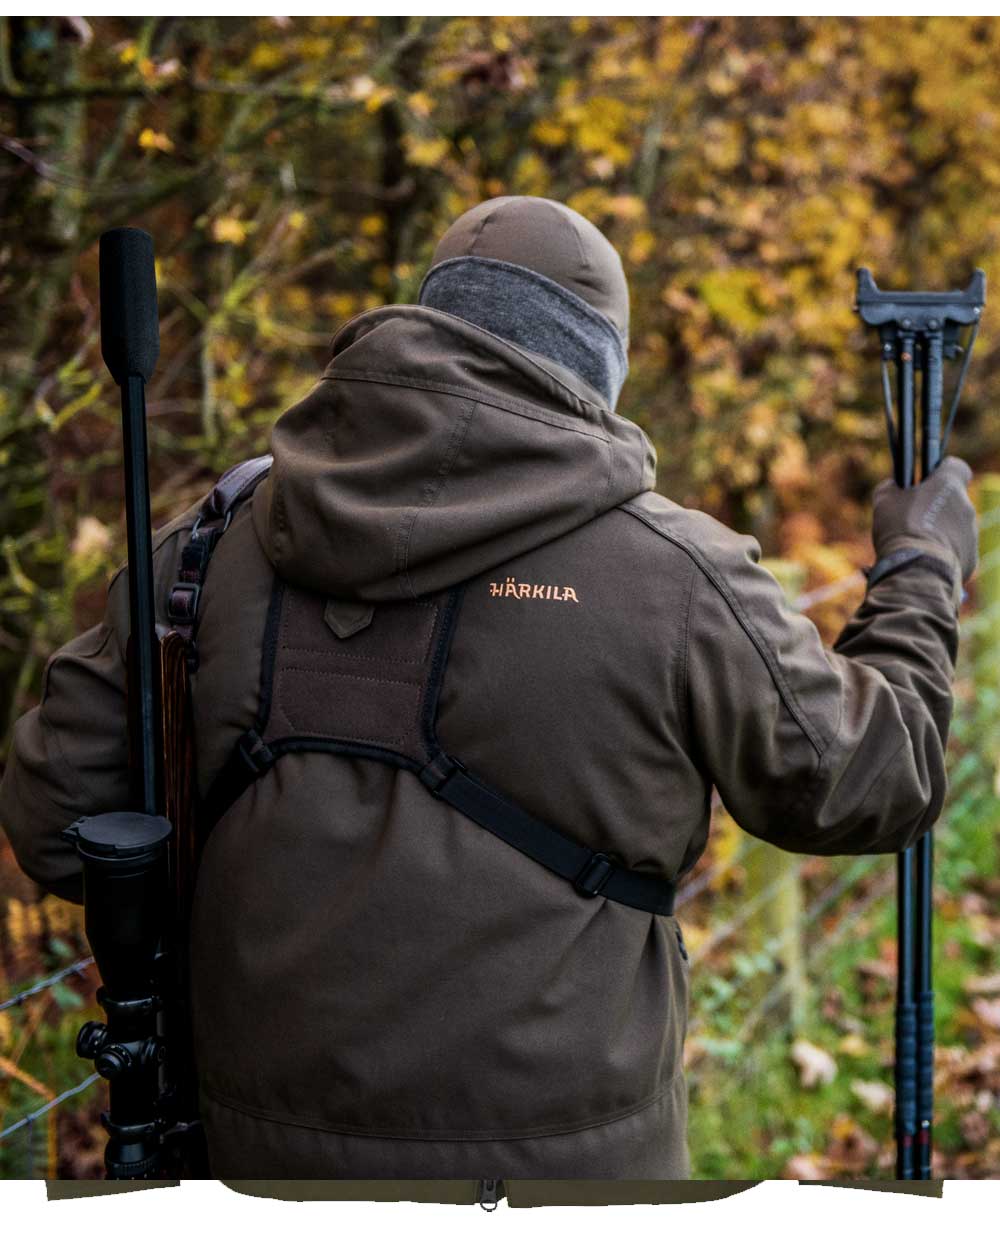 Rear view Harkila Pro Hunter Move 2.0 GTX Jacket is the ultimate jacket for the hunting